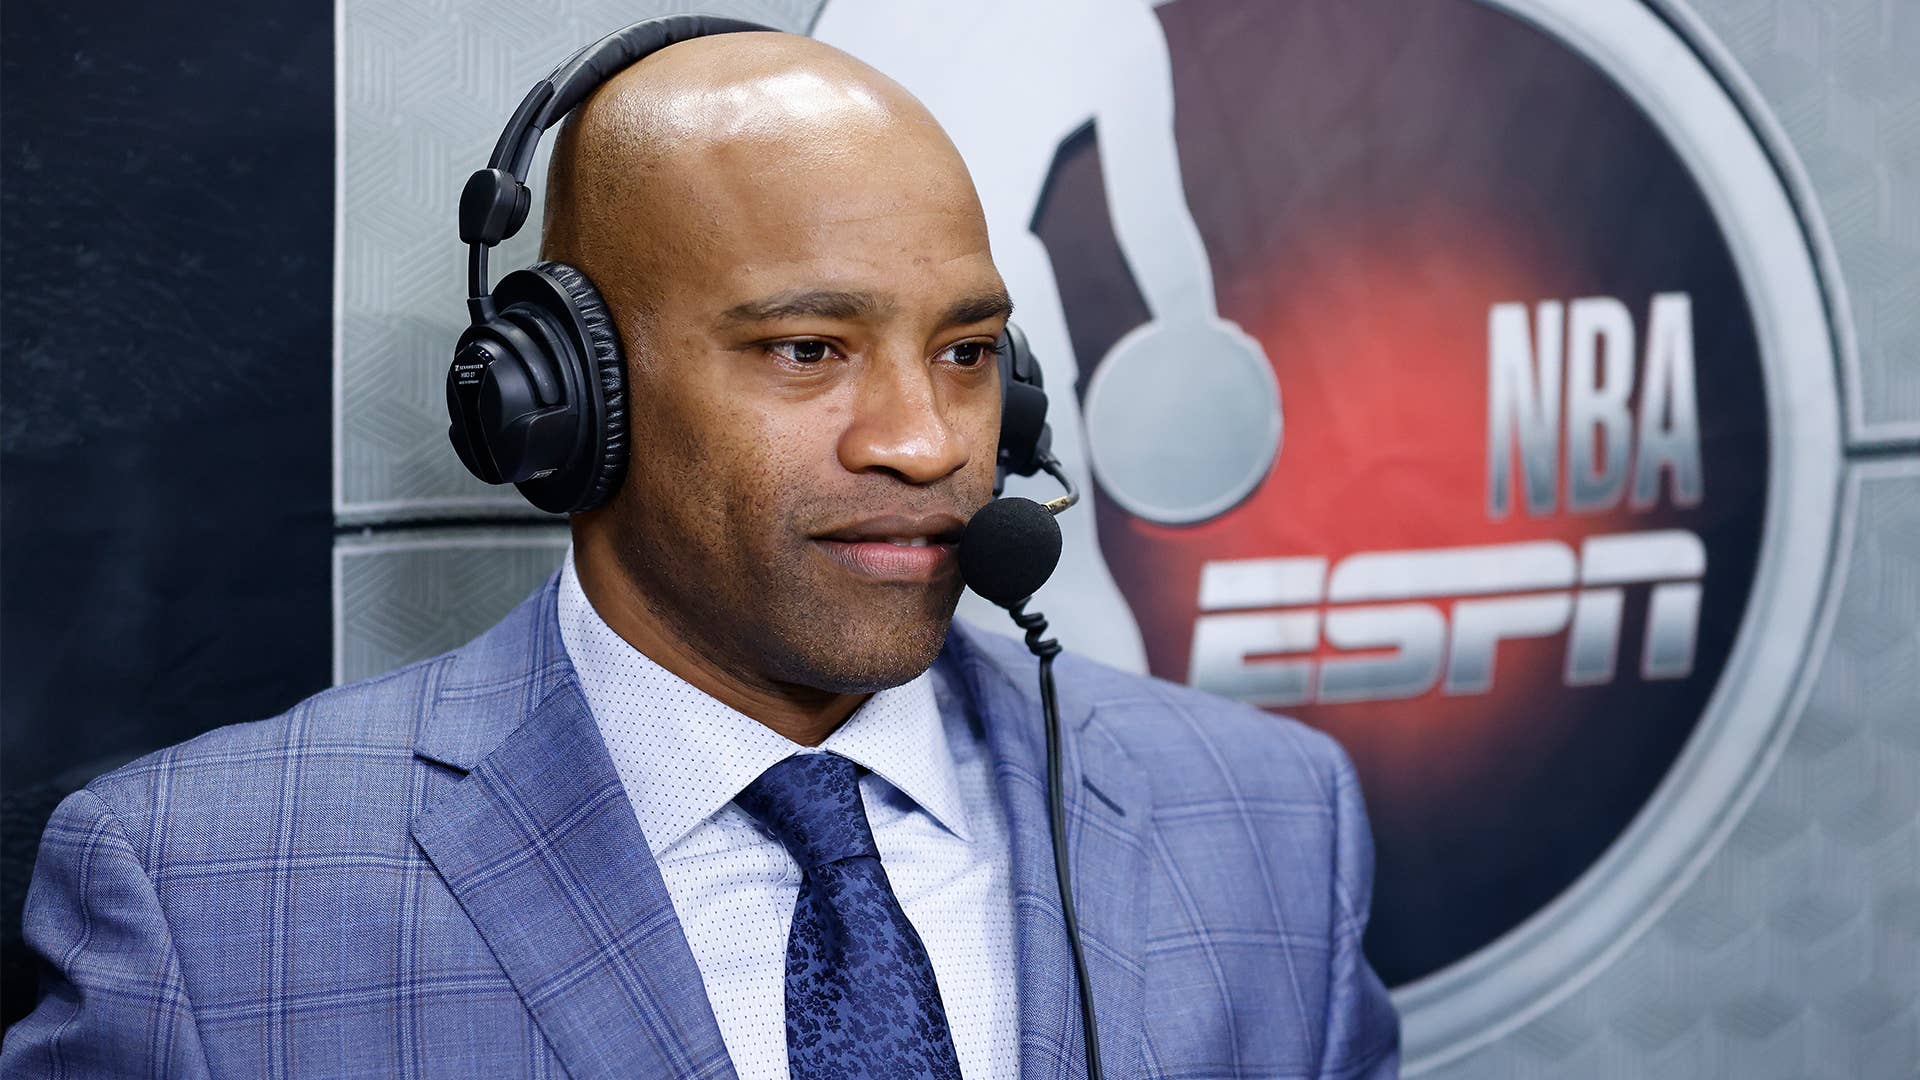 Vince Carter in a suit broadcasting